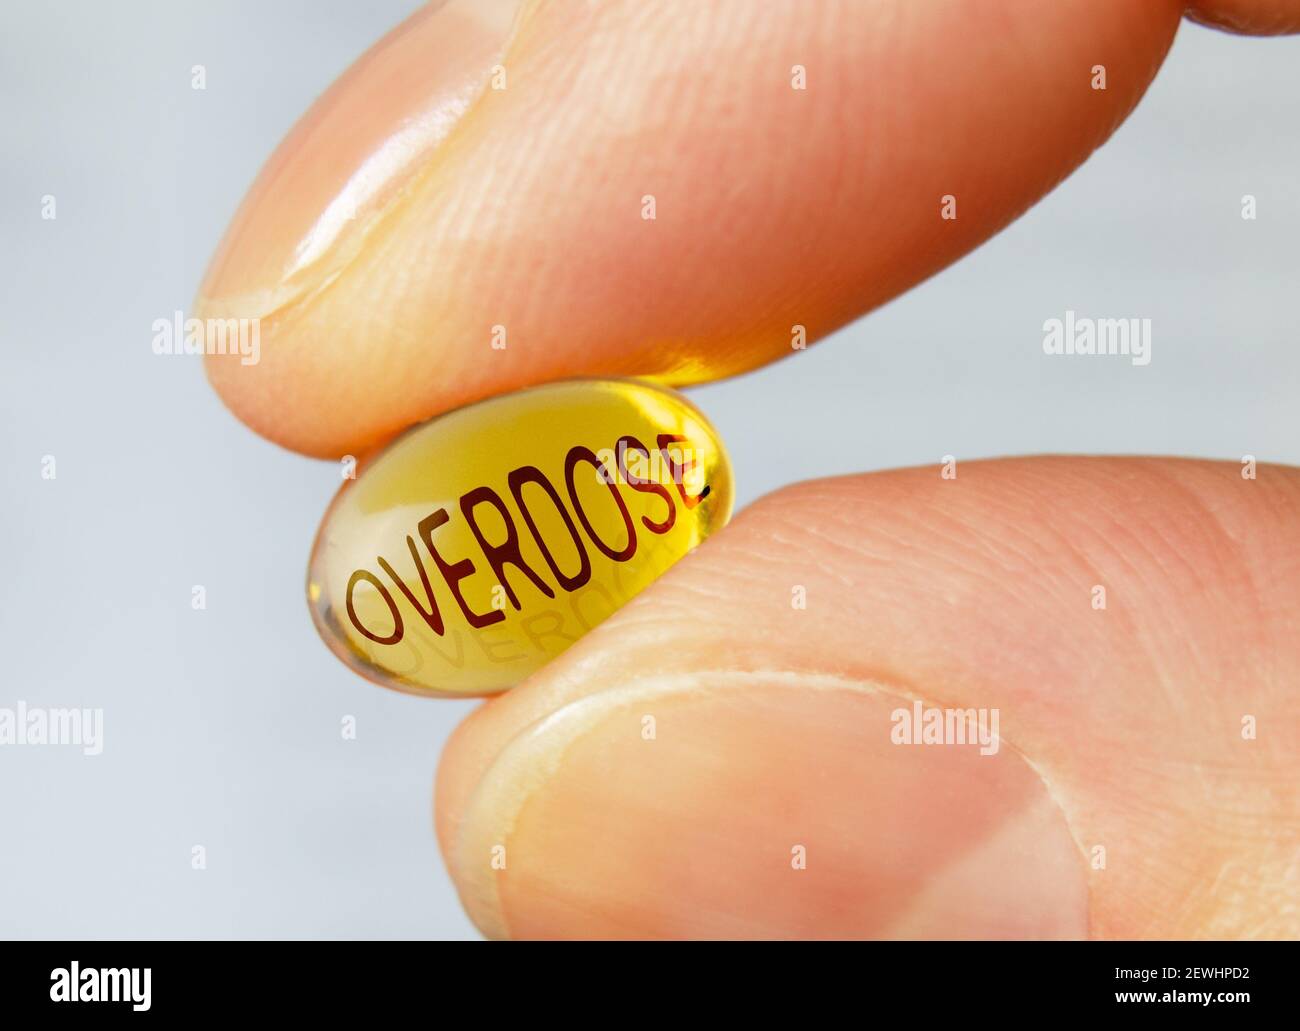 Yellow softgel pill with text overdose on it in female fingers closeup. Stock Photo